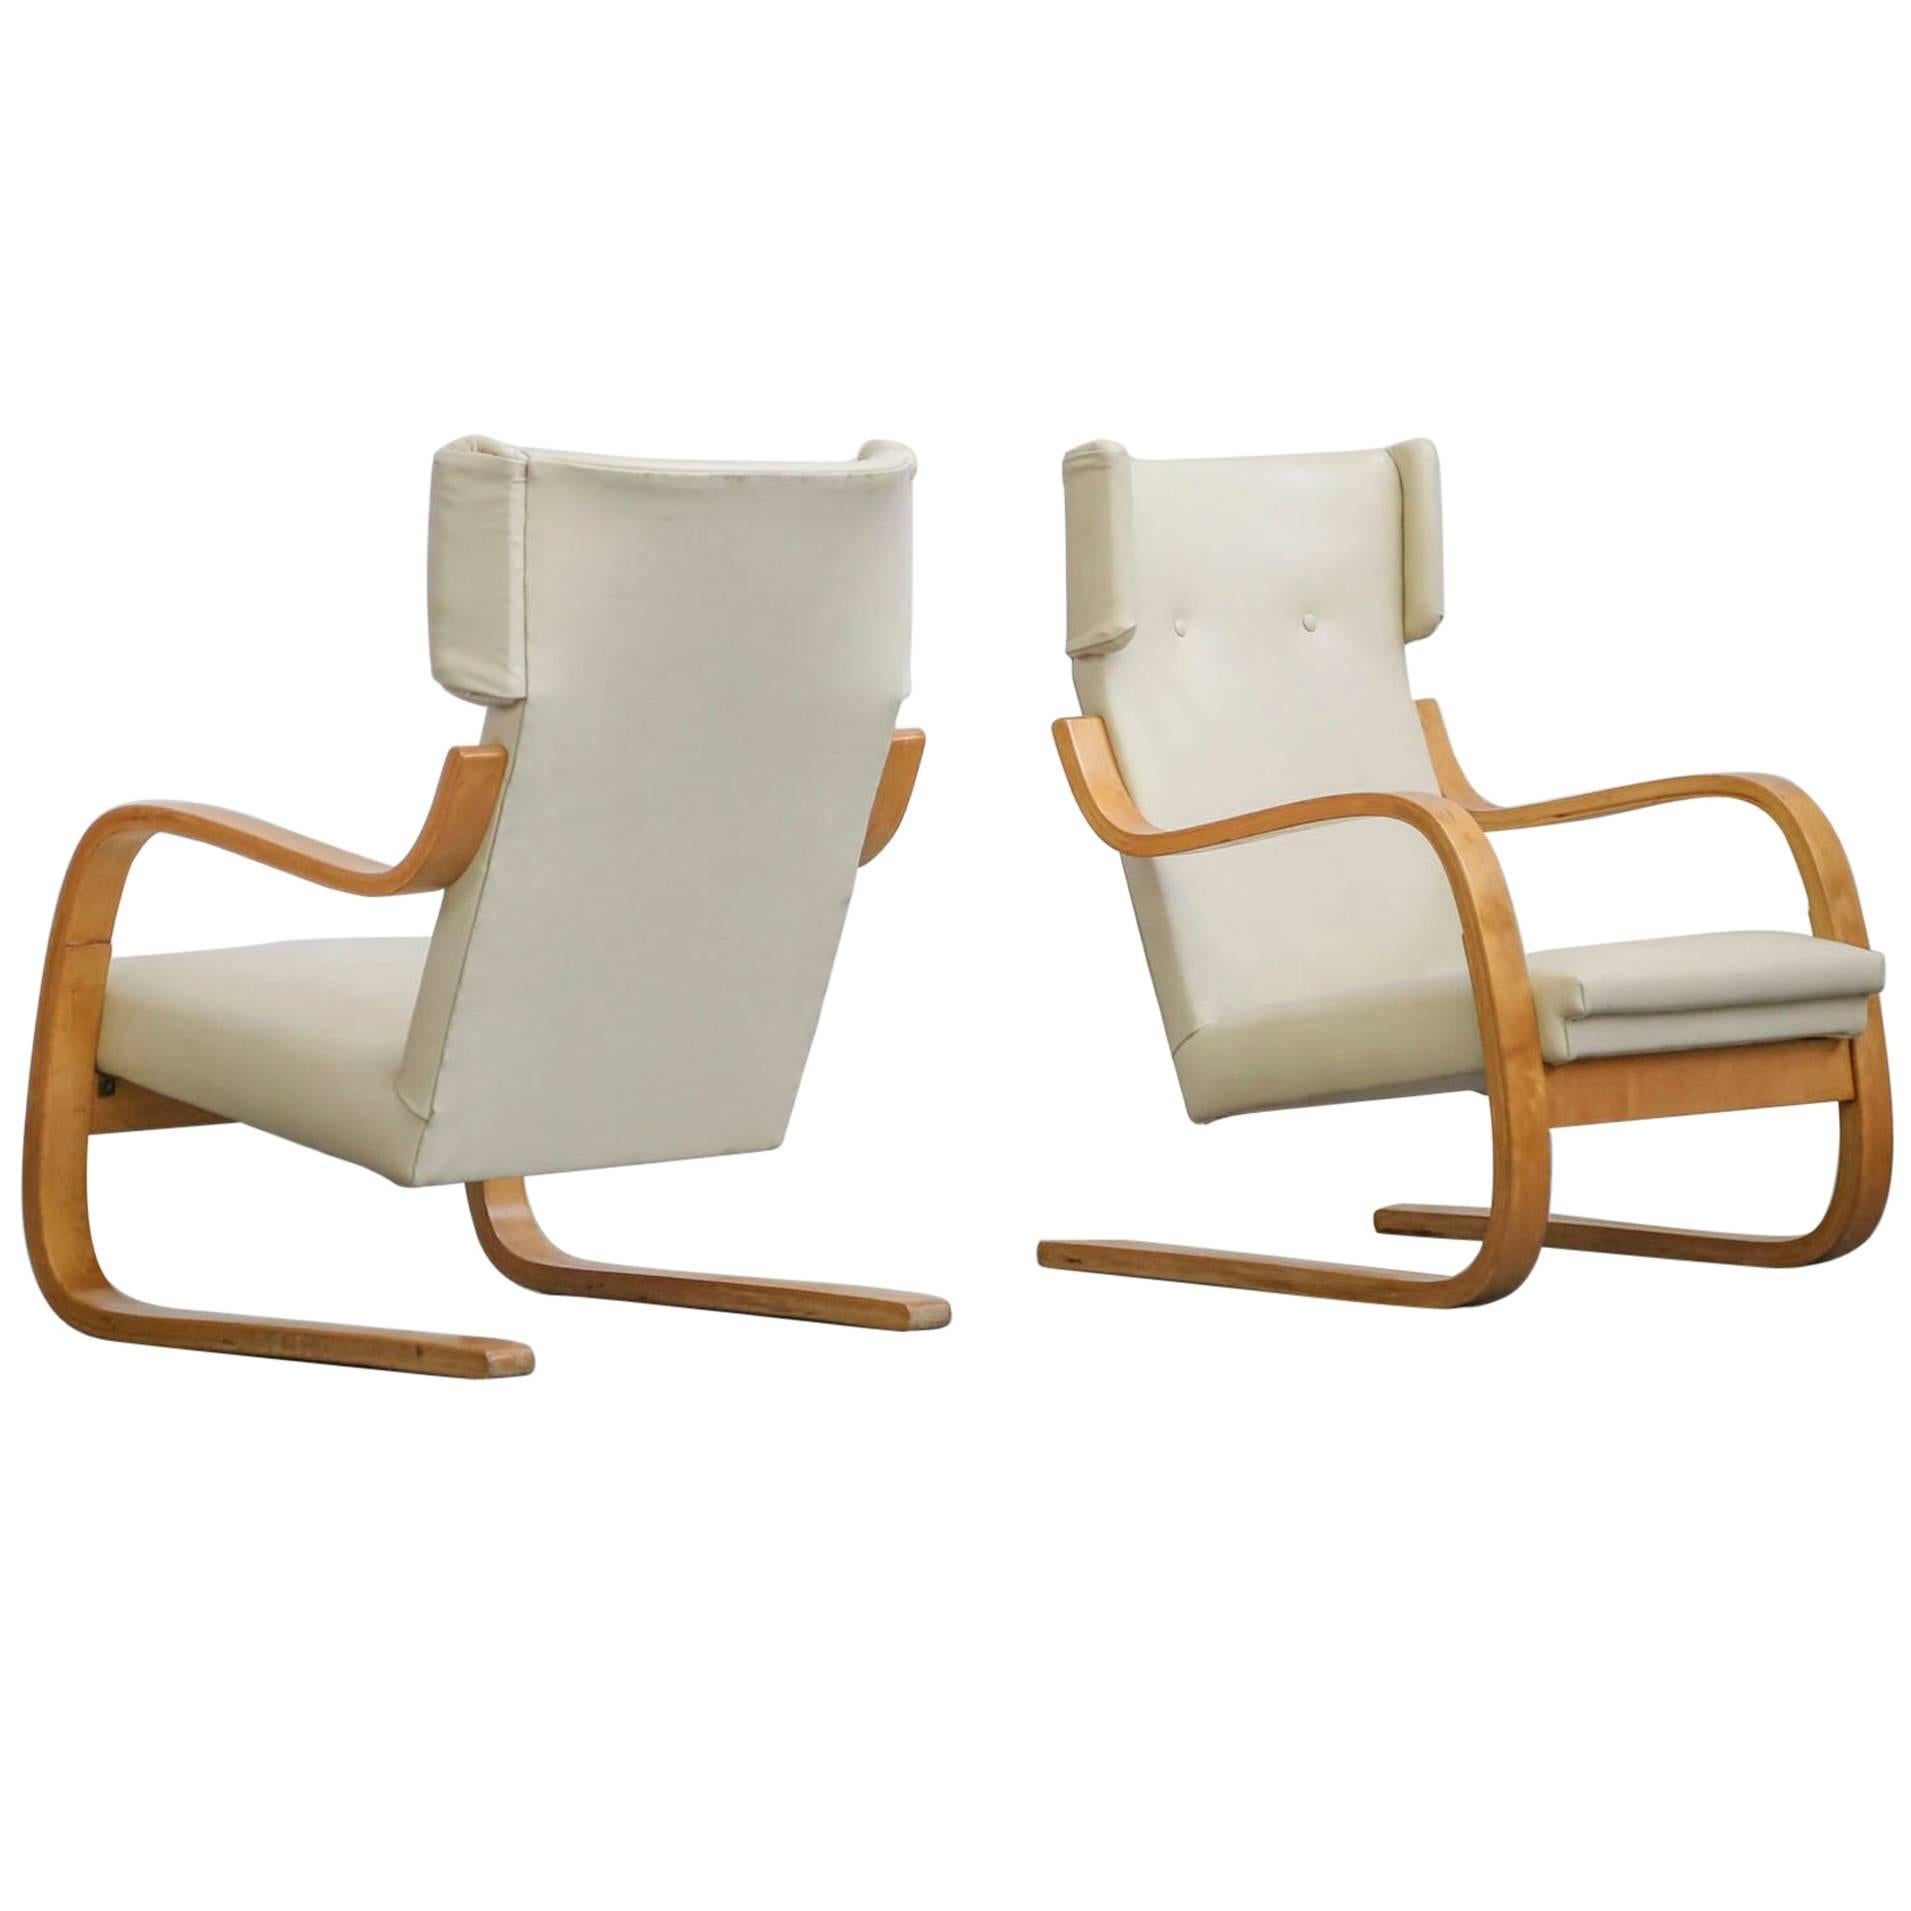 Pair of Lounge Chairs Model 401 by Alvar Aalto, 1935 Finland Design